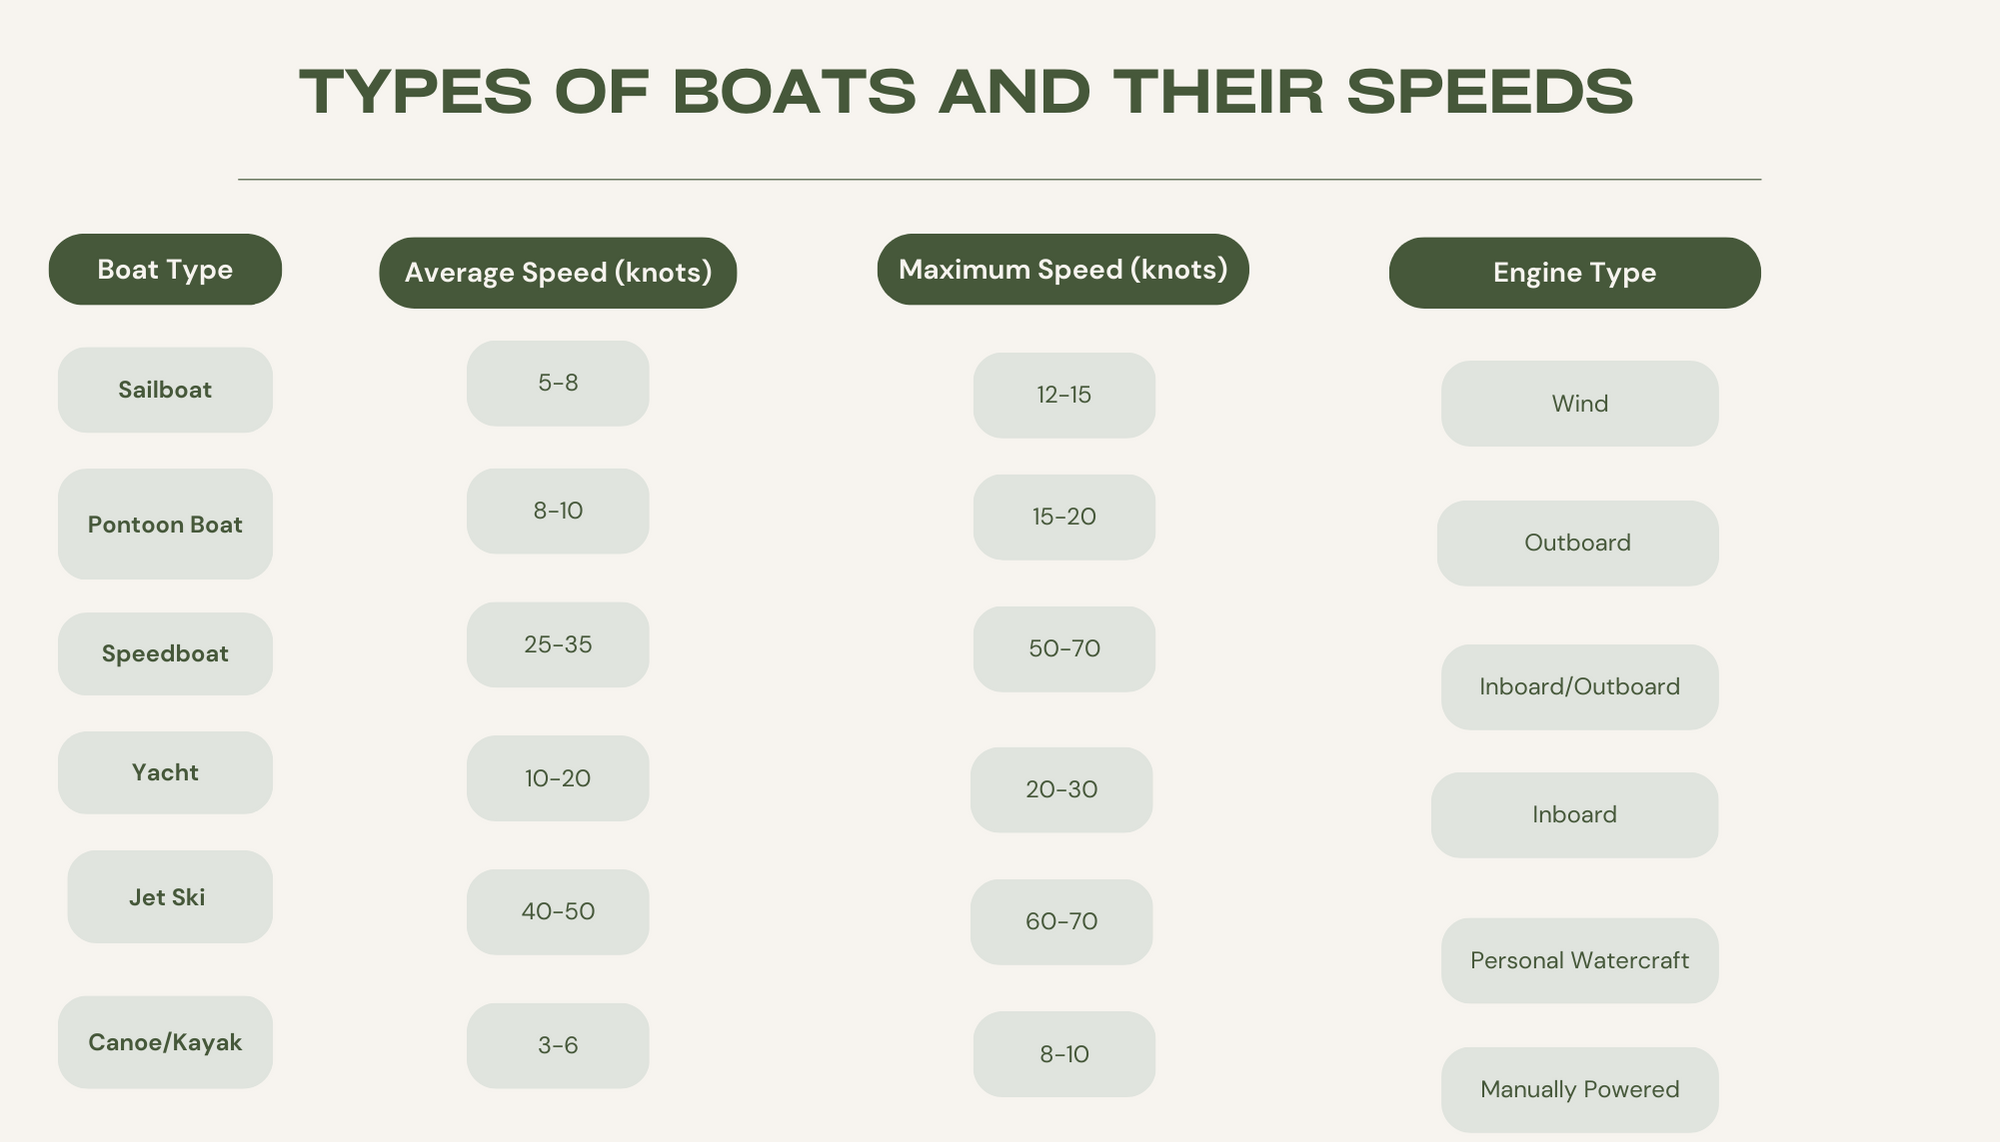 TABLE SHOWING VARIOUS BOAT TYPES WITH THEIR SPEED